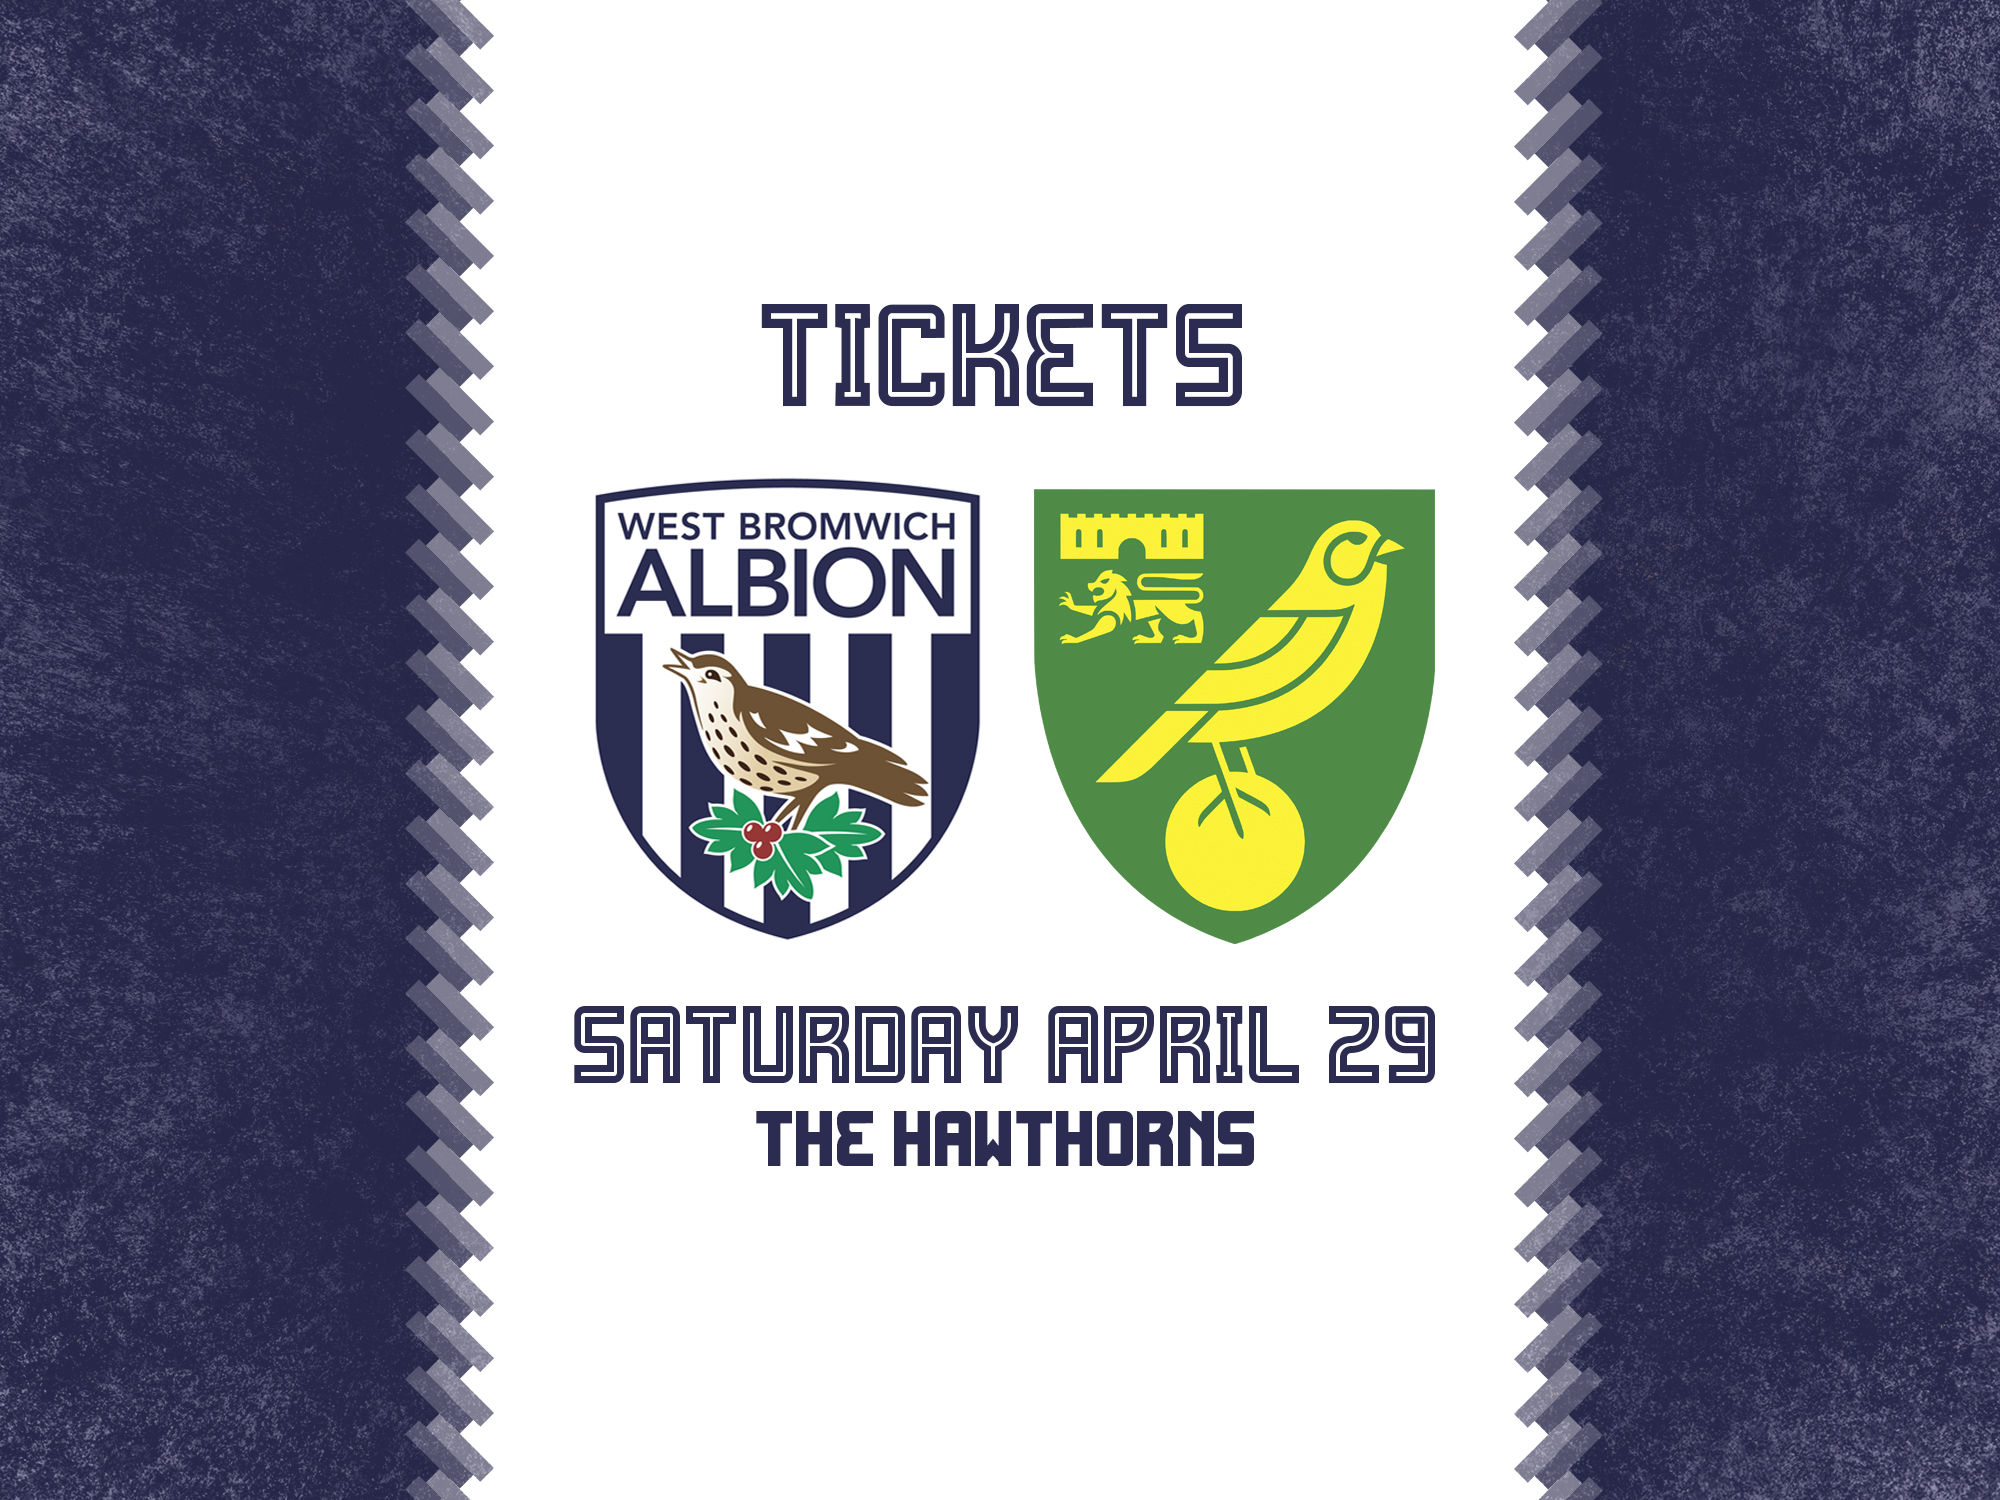 A ticket graphic for Albion's game against Norwich